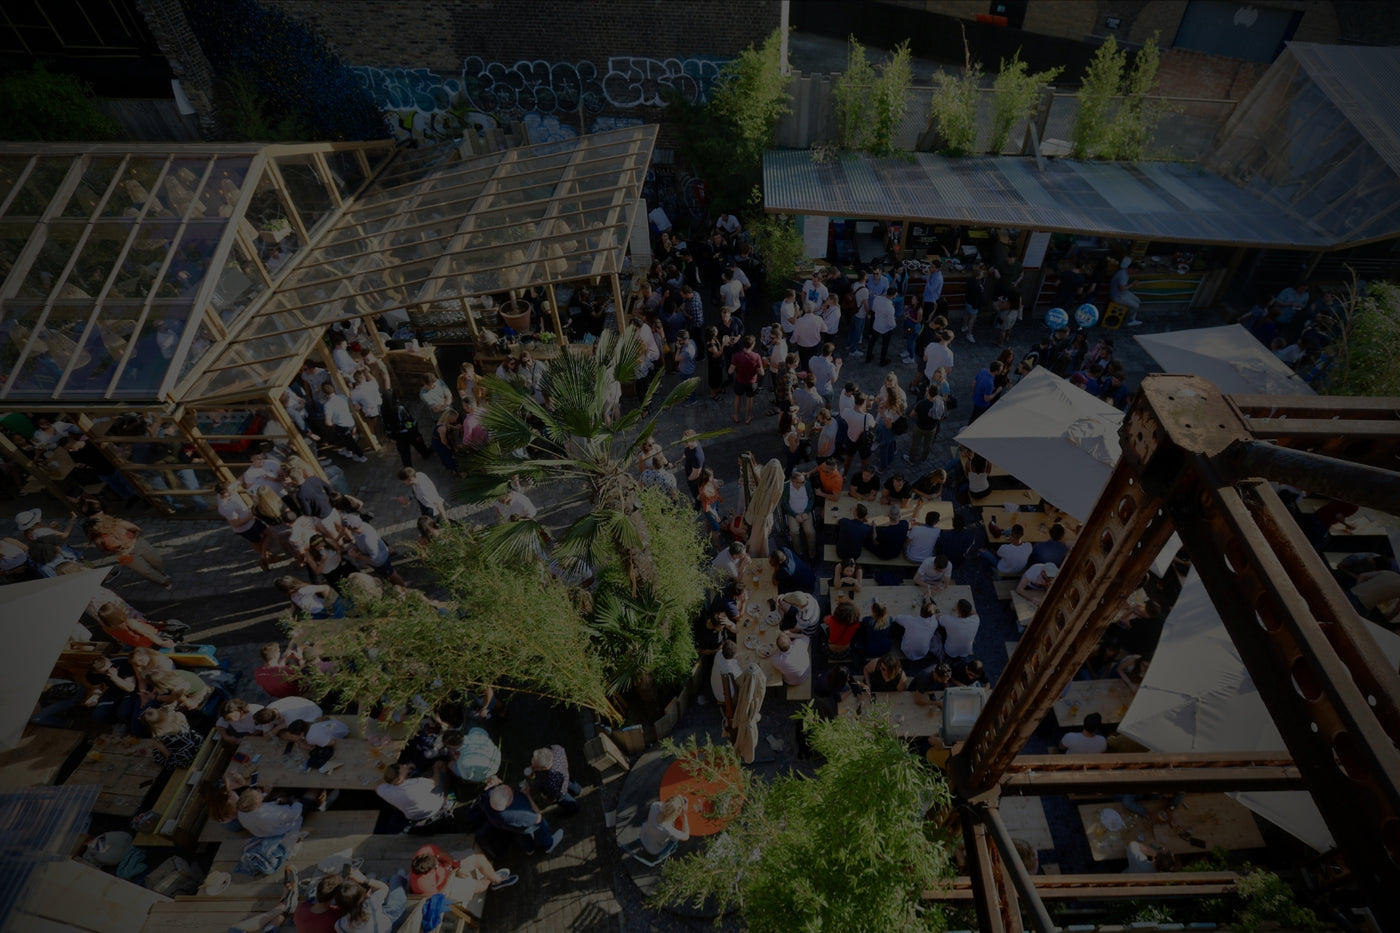 Our London Gin & Beer Garden gets a Social Distancing MAKEOVER!